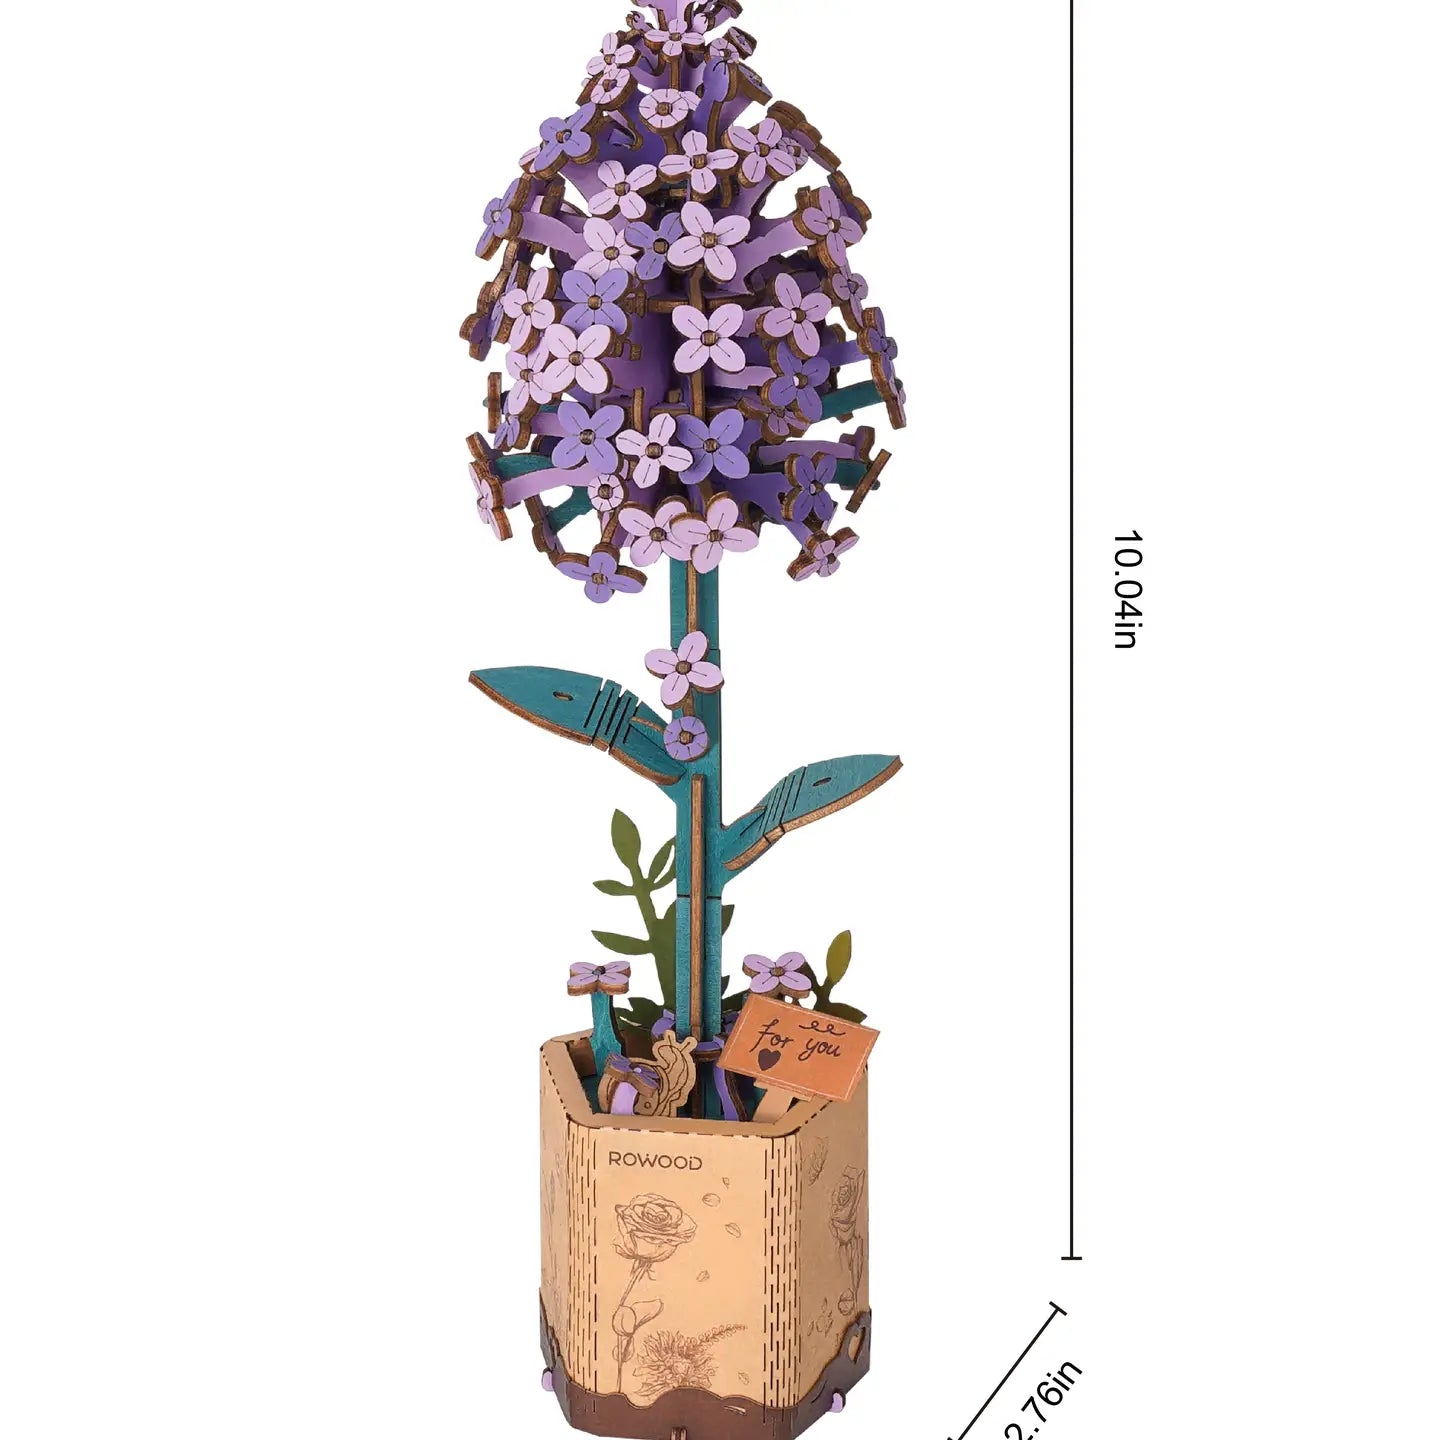 A wooden 3D puzzle of a lilac flower, inspired by nature. 96pcs, 30min assembly. Decorative and giftable. Dimensions: 9.6 x 6.5 x 0.3 in. From Strangecat Toys, a blind box and art toy store.